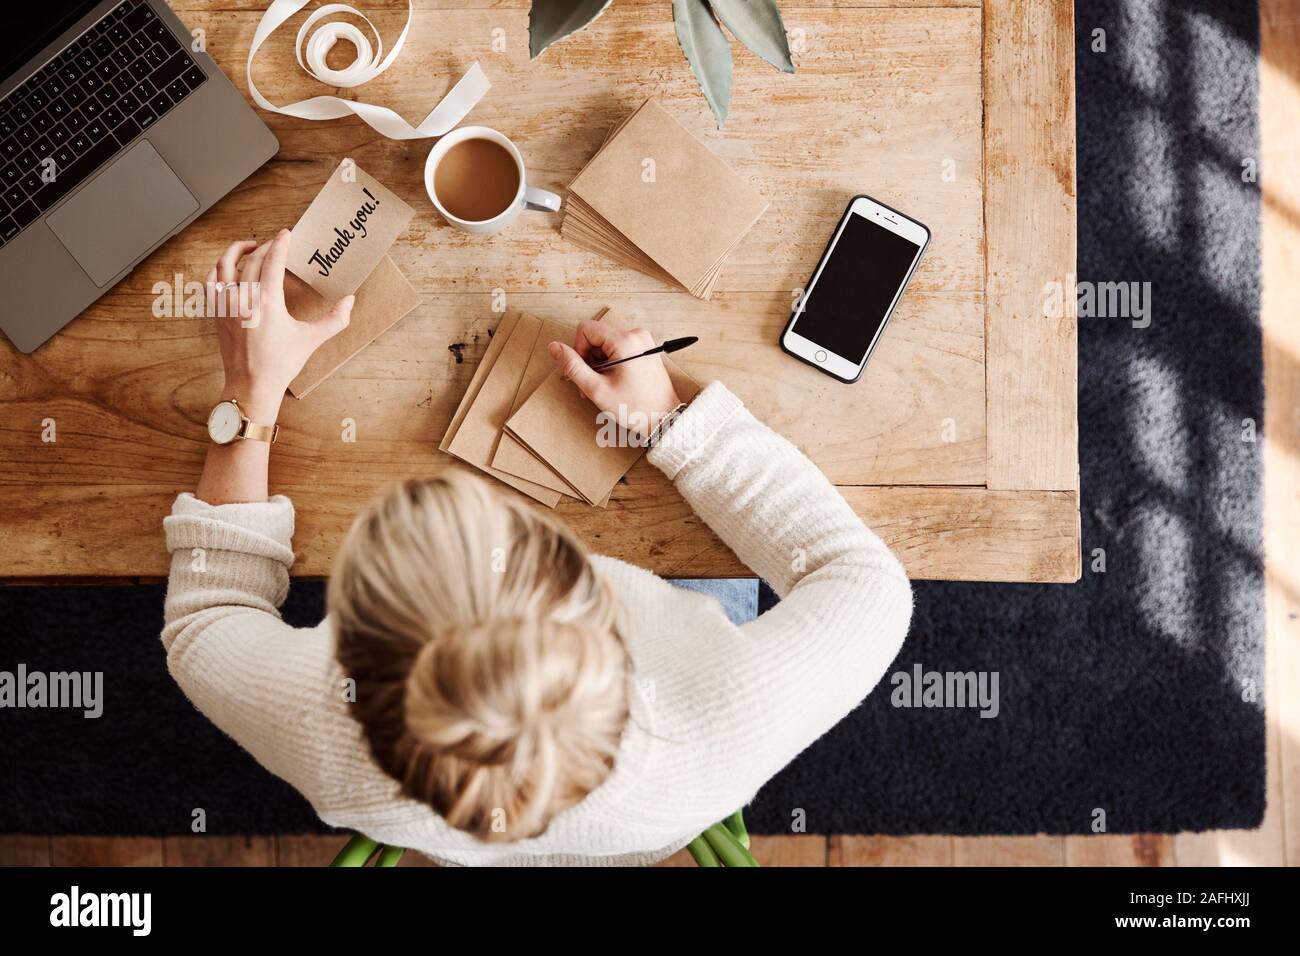 Overhead Shot Looking Down On Woman Writing In Generic Thank You Card Stock Photo